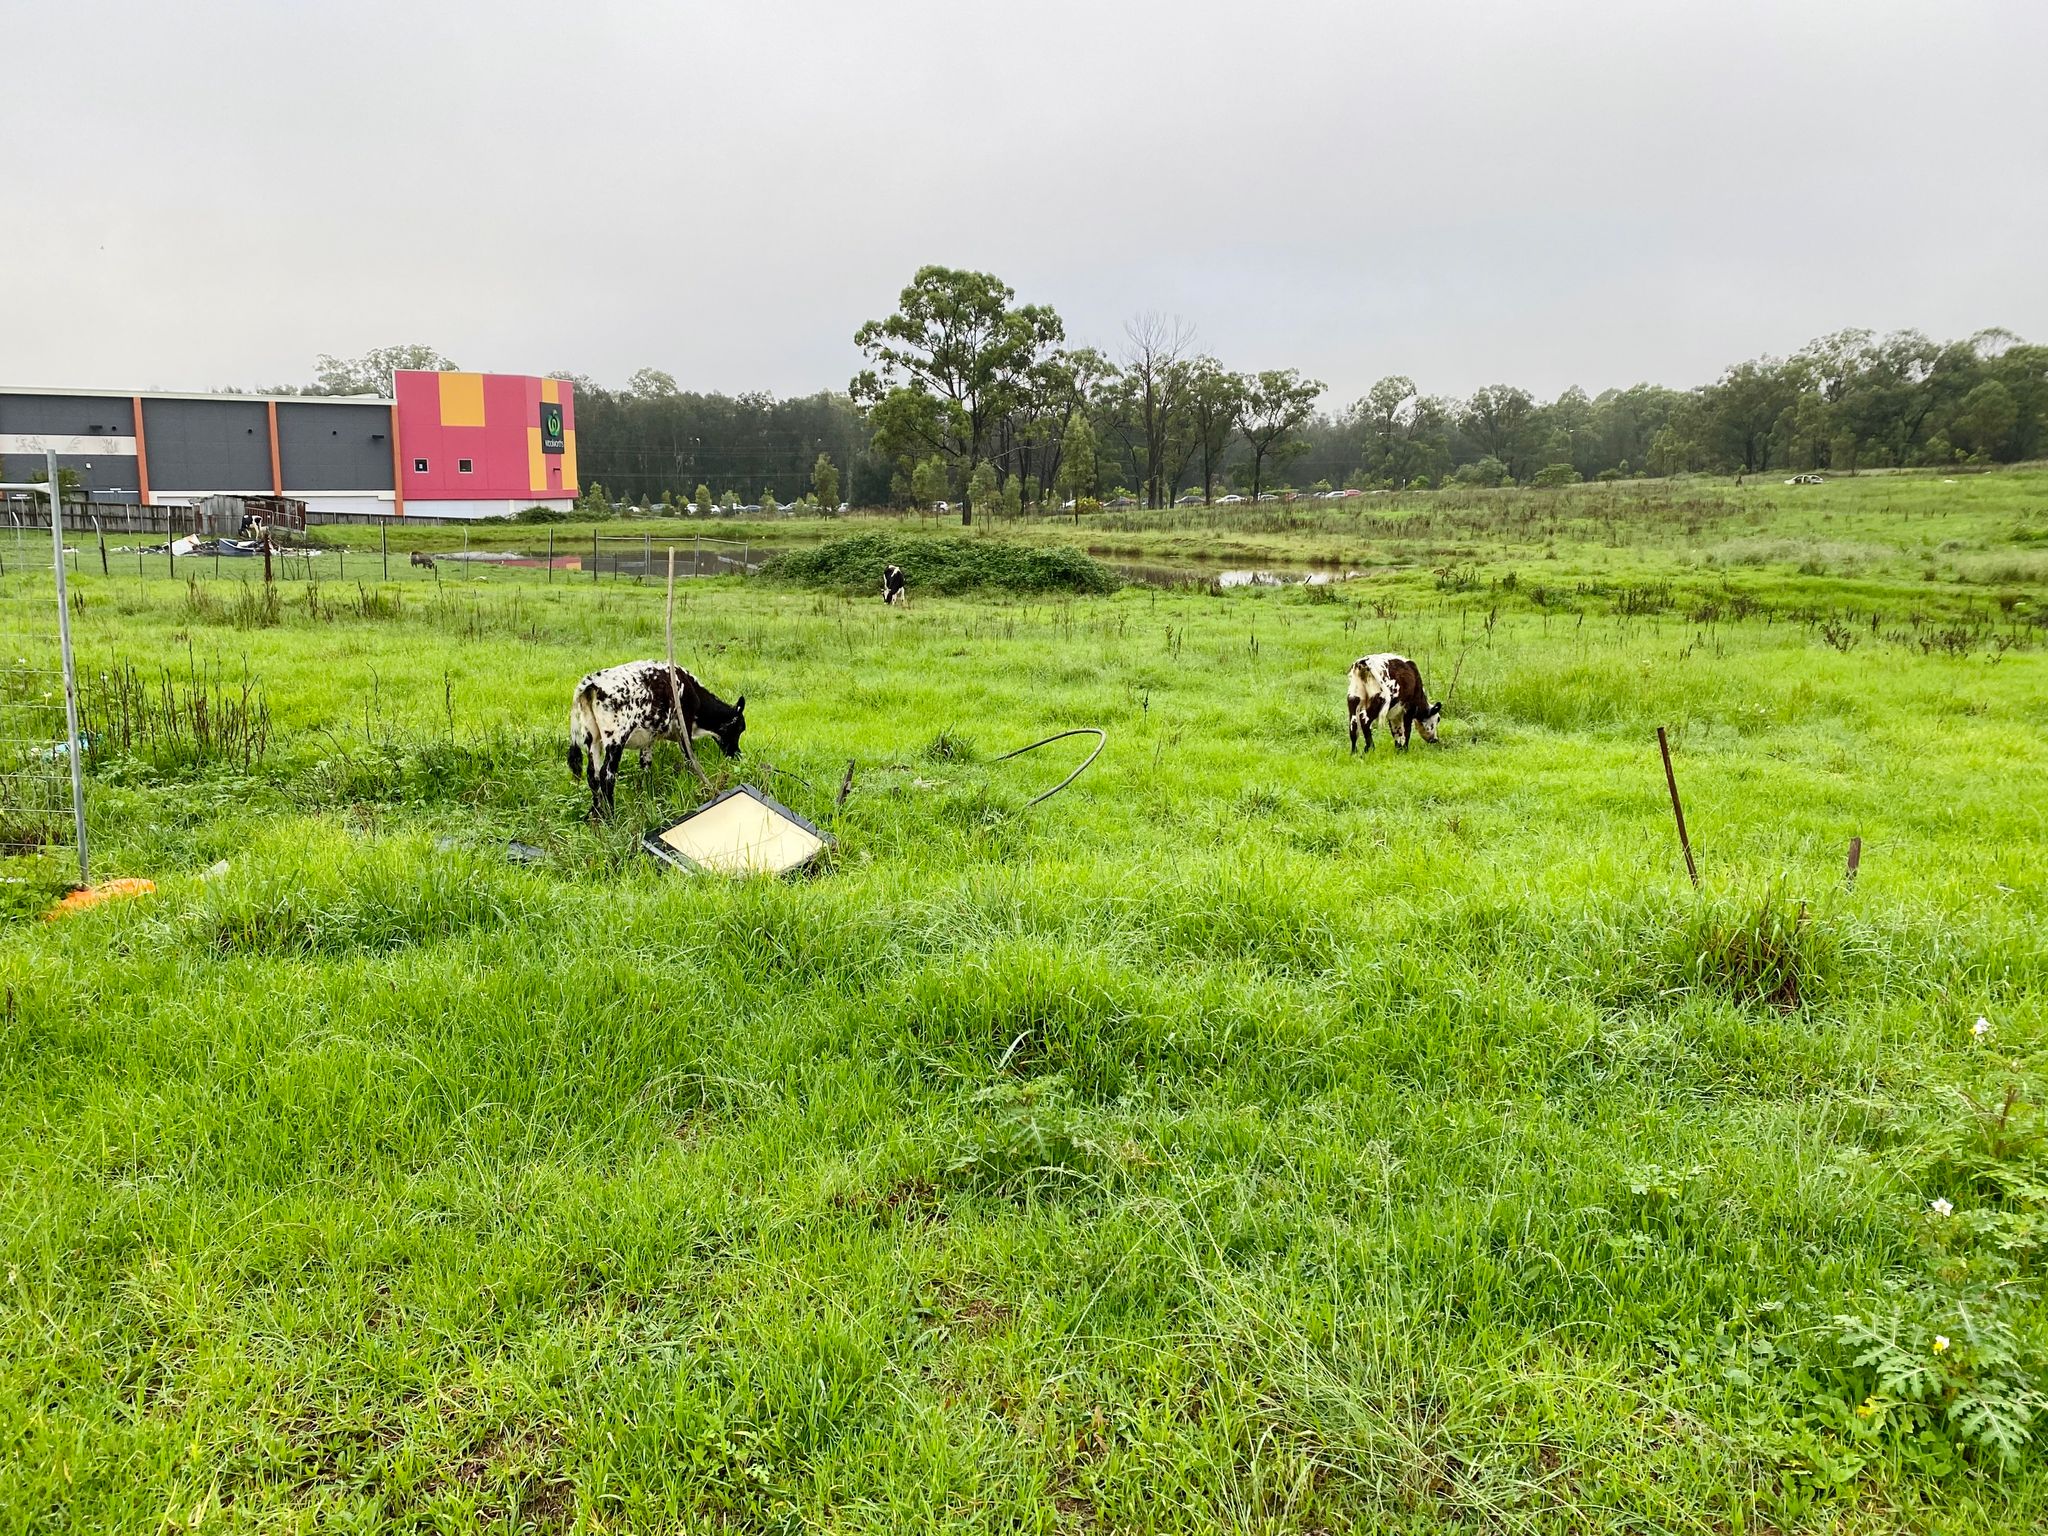 A photo of two black and white calves with their heads down eating grass in an overgrown field. A supermarket building is visible in the distance.